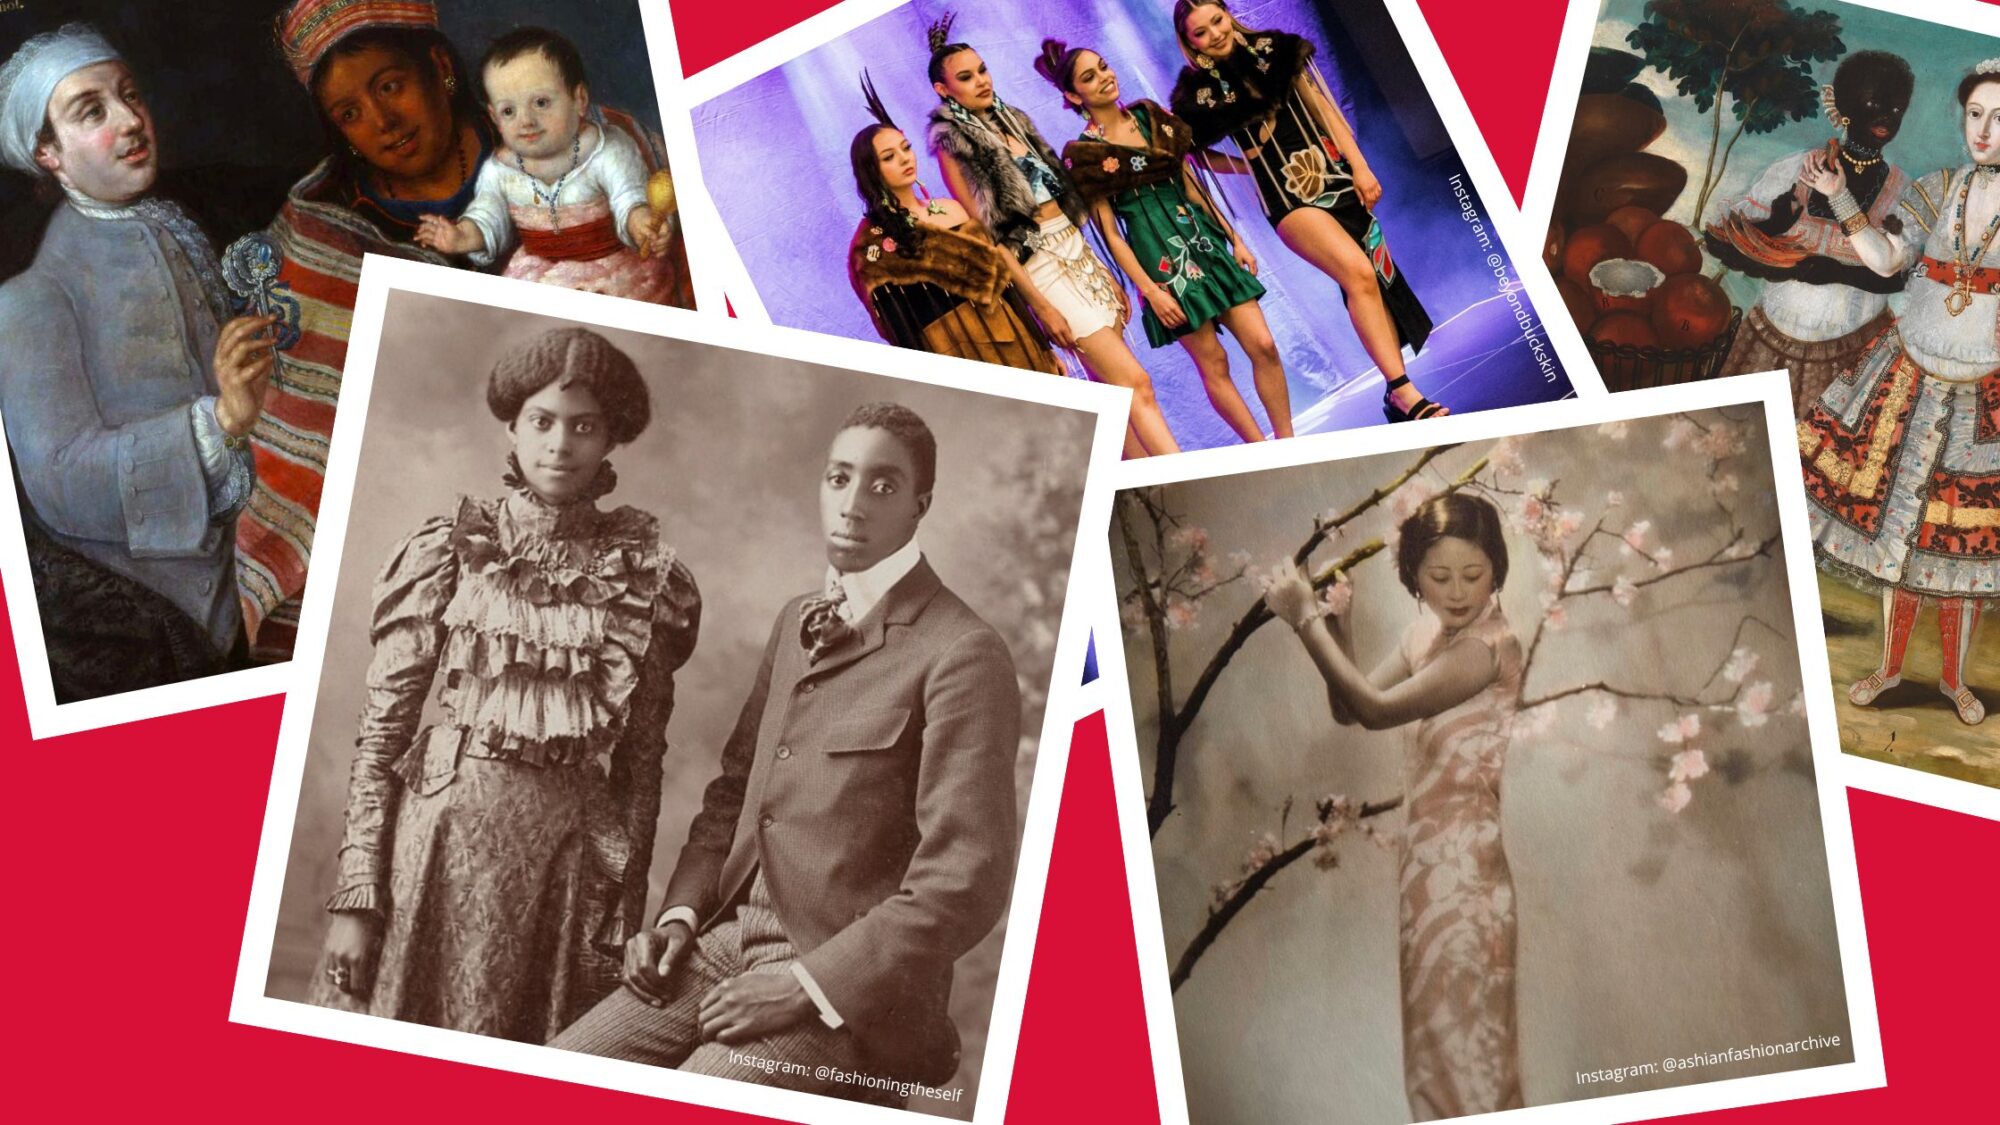 Collage of photos representing the fashion practices of Black, Asian, Native American, and colonial American people.